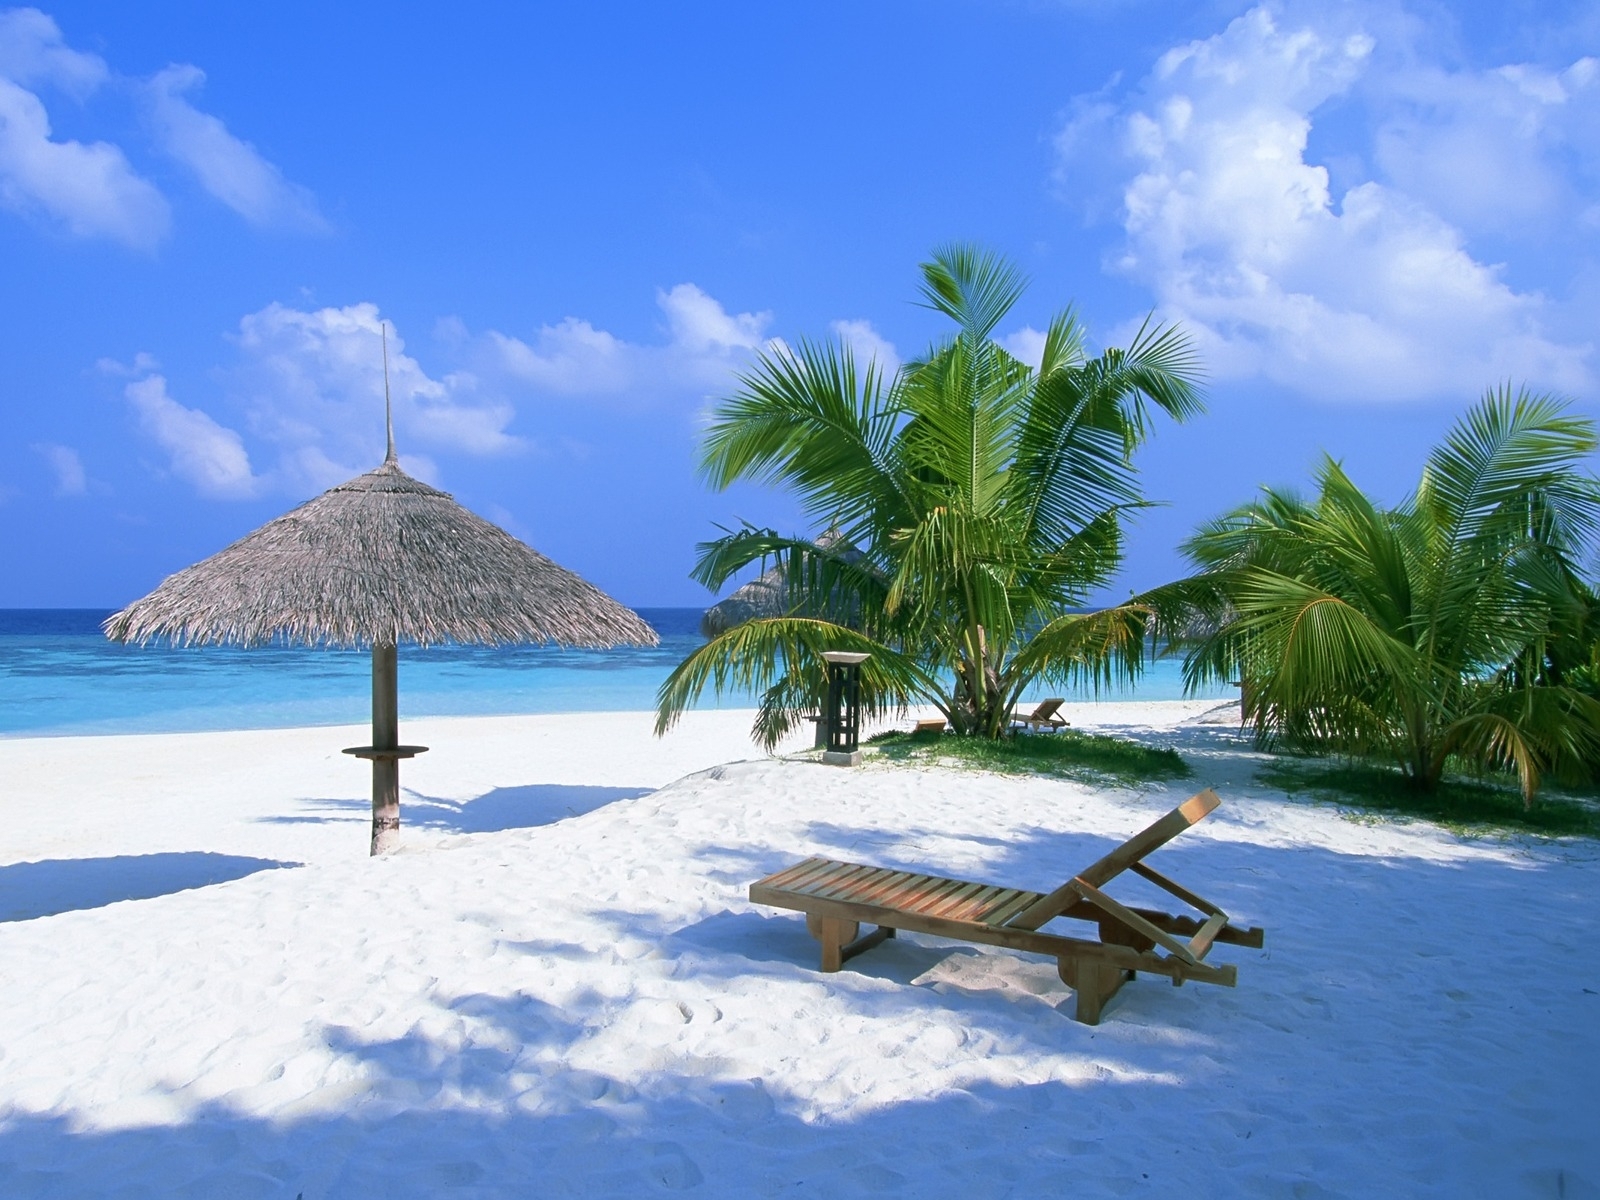 10 New Pictures Of Exotic Beaches FULL HD 1080p For PC Desktop